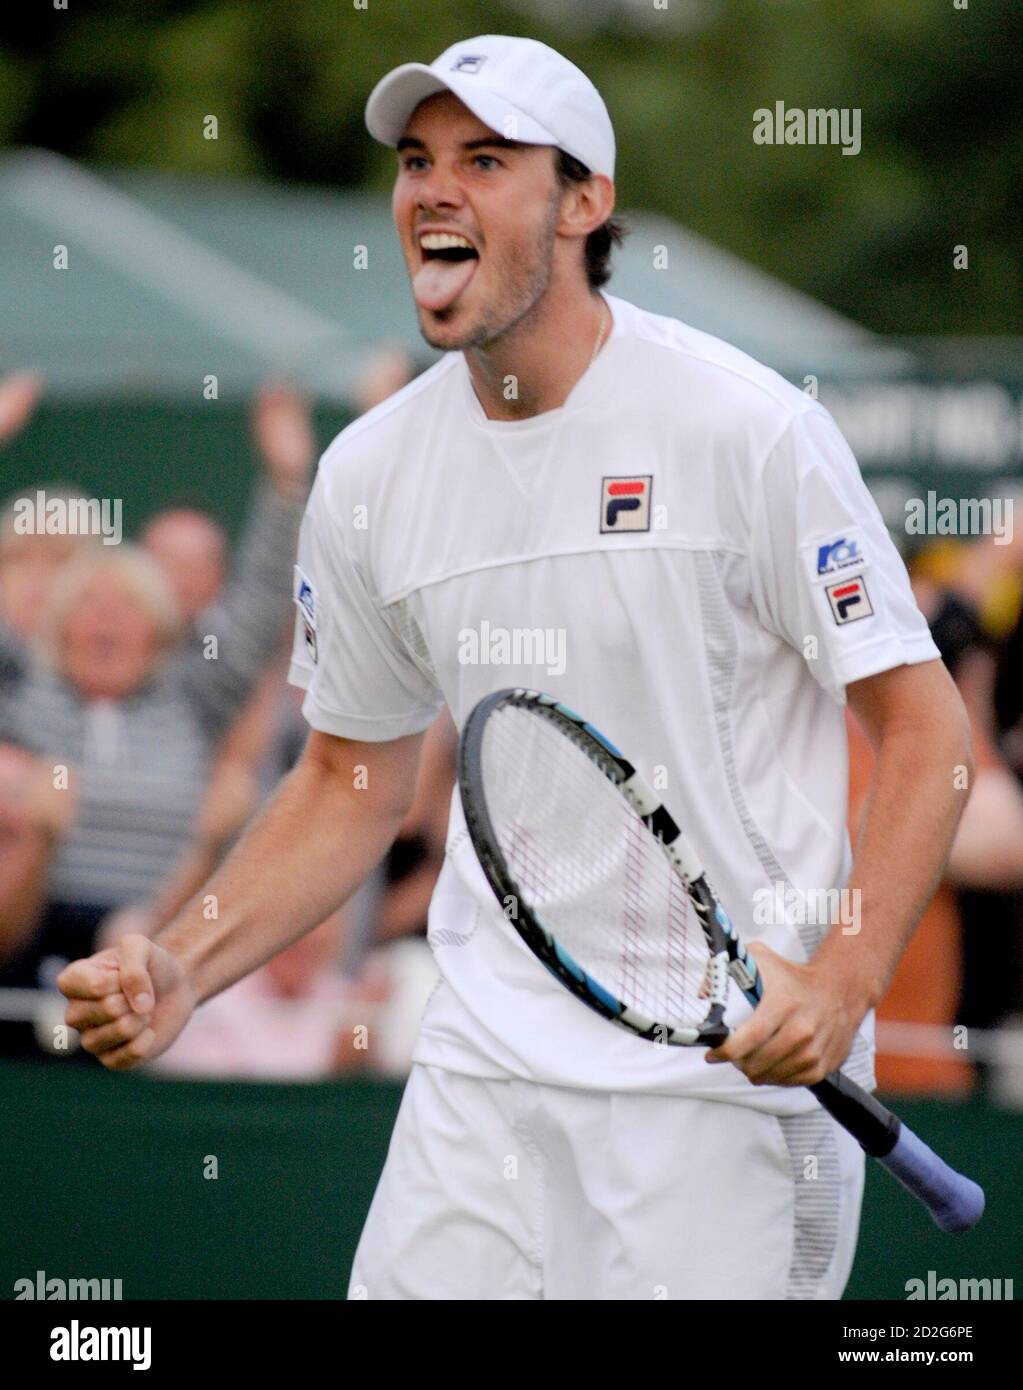 Chris Eaton of Britain celebrates defeating Boris Pashanski of Serbia  during their match at the Wimbledon tennis championships in London June 24,  2008. REUTERS/Toby Melville (BRITAIN Stock Photo - Alamy